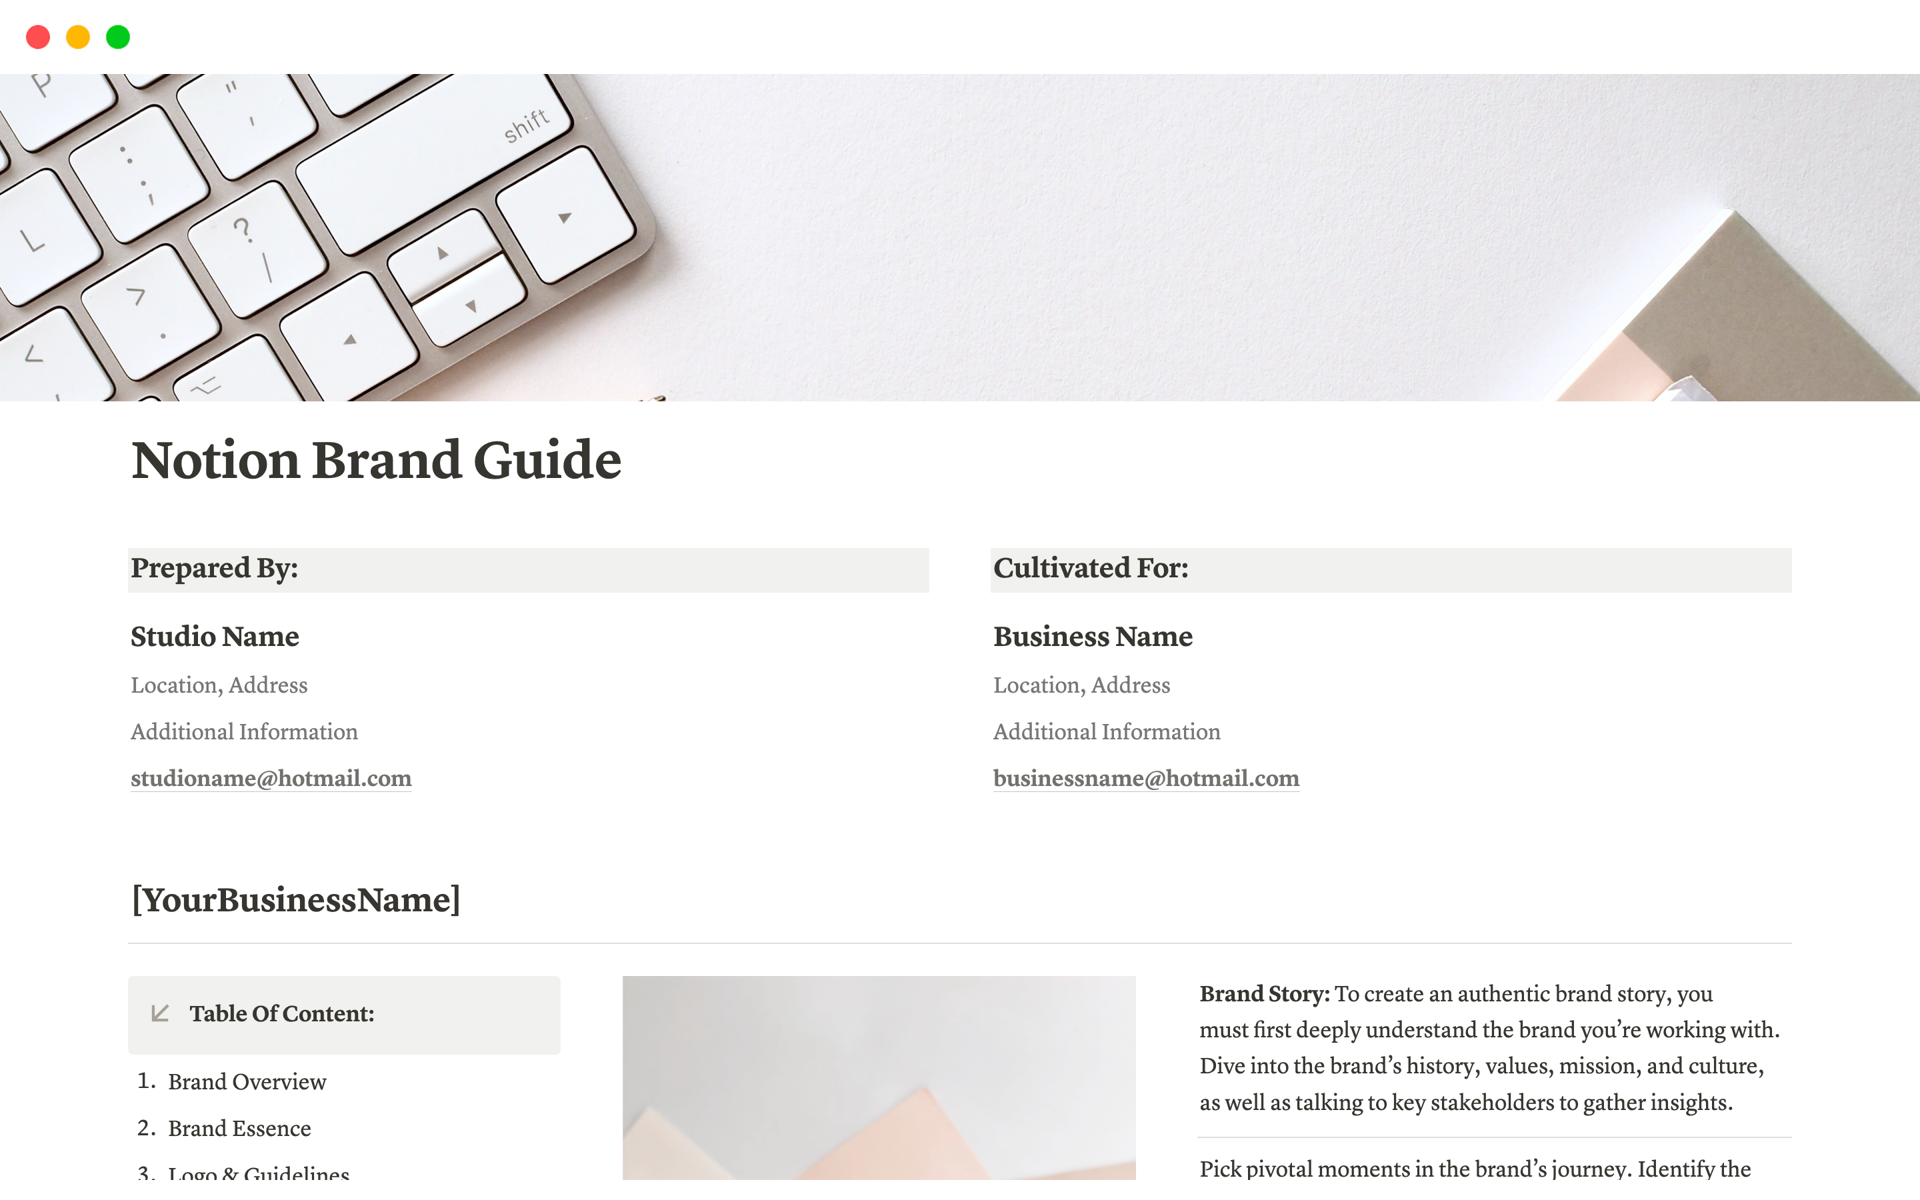 PRESENTING OUR BRAND GUIDELINES TEMPLATE FOR NOTION!